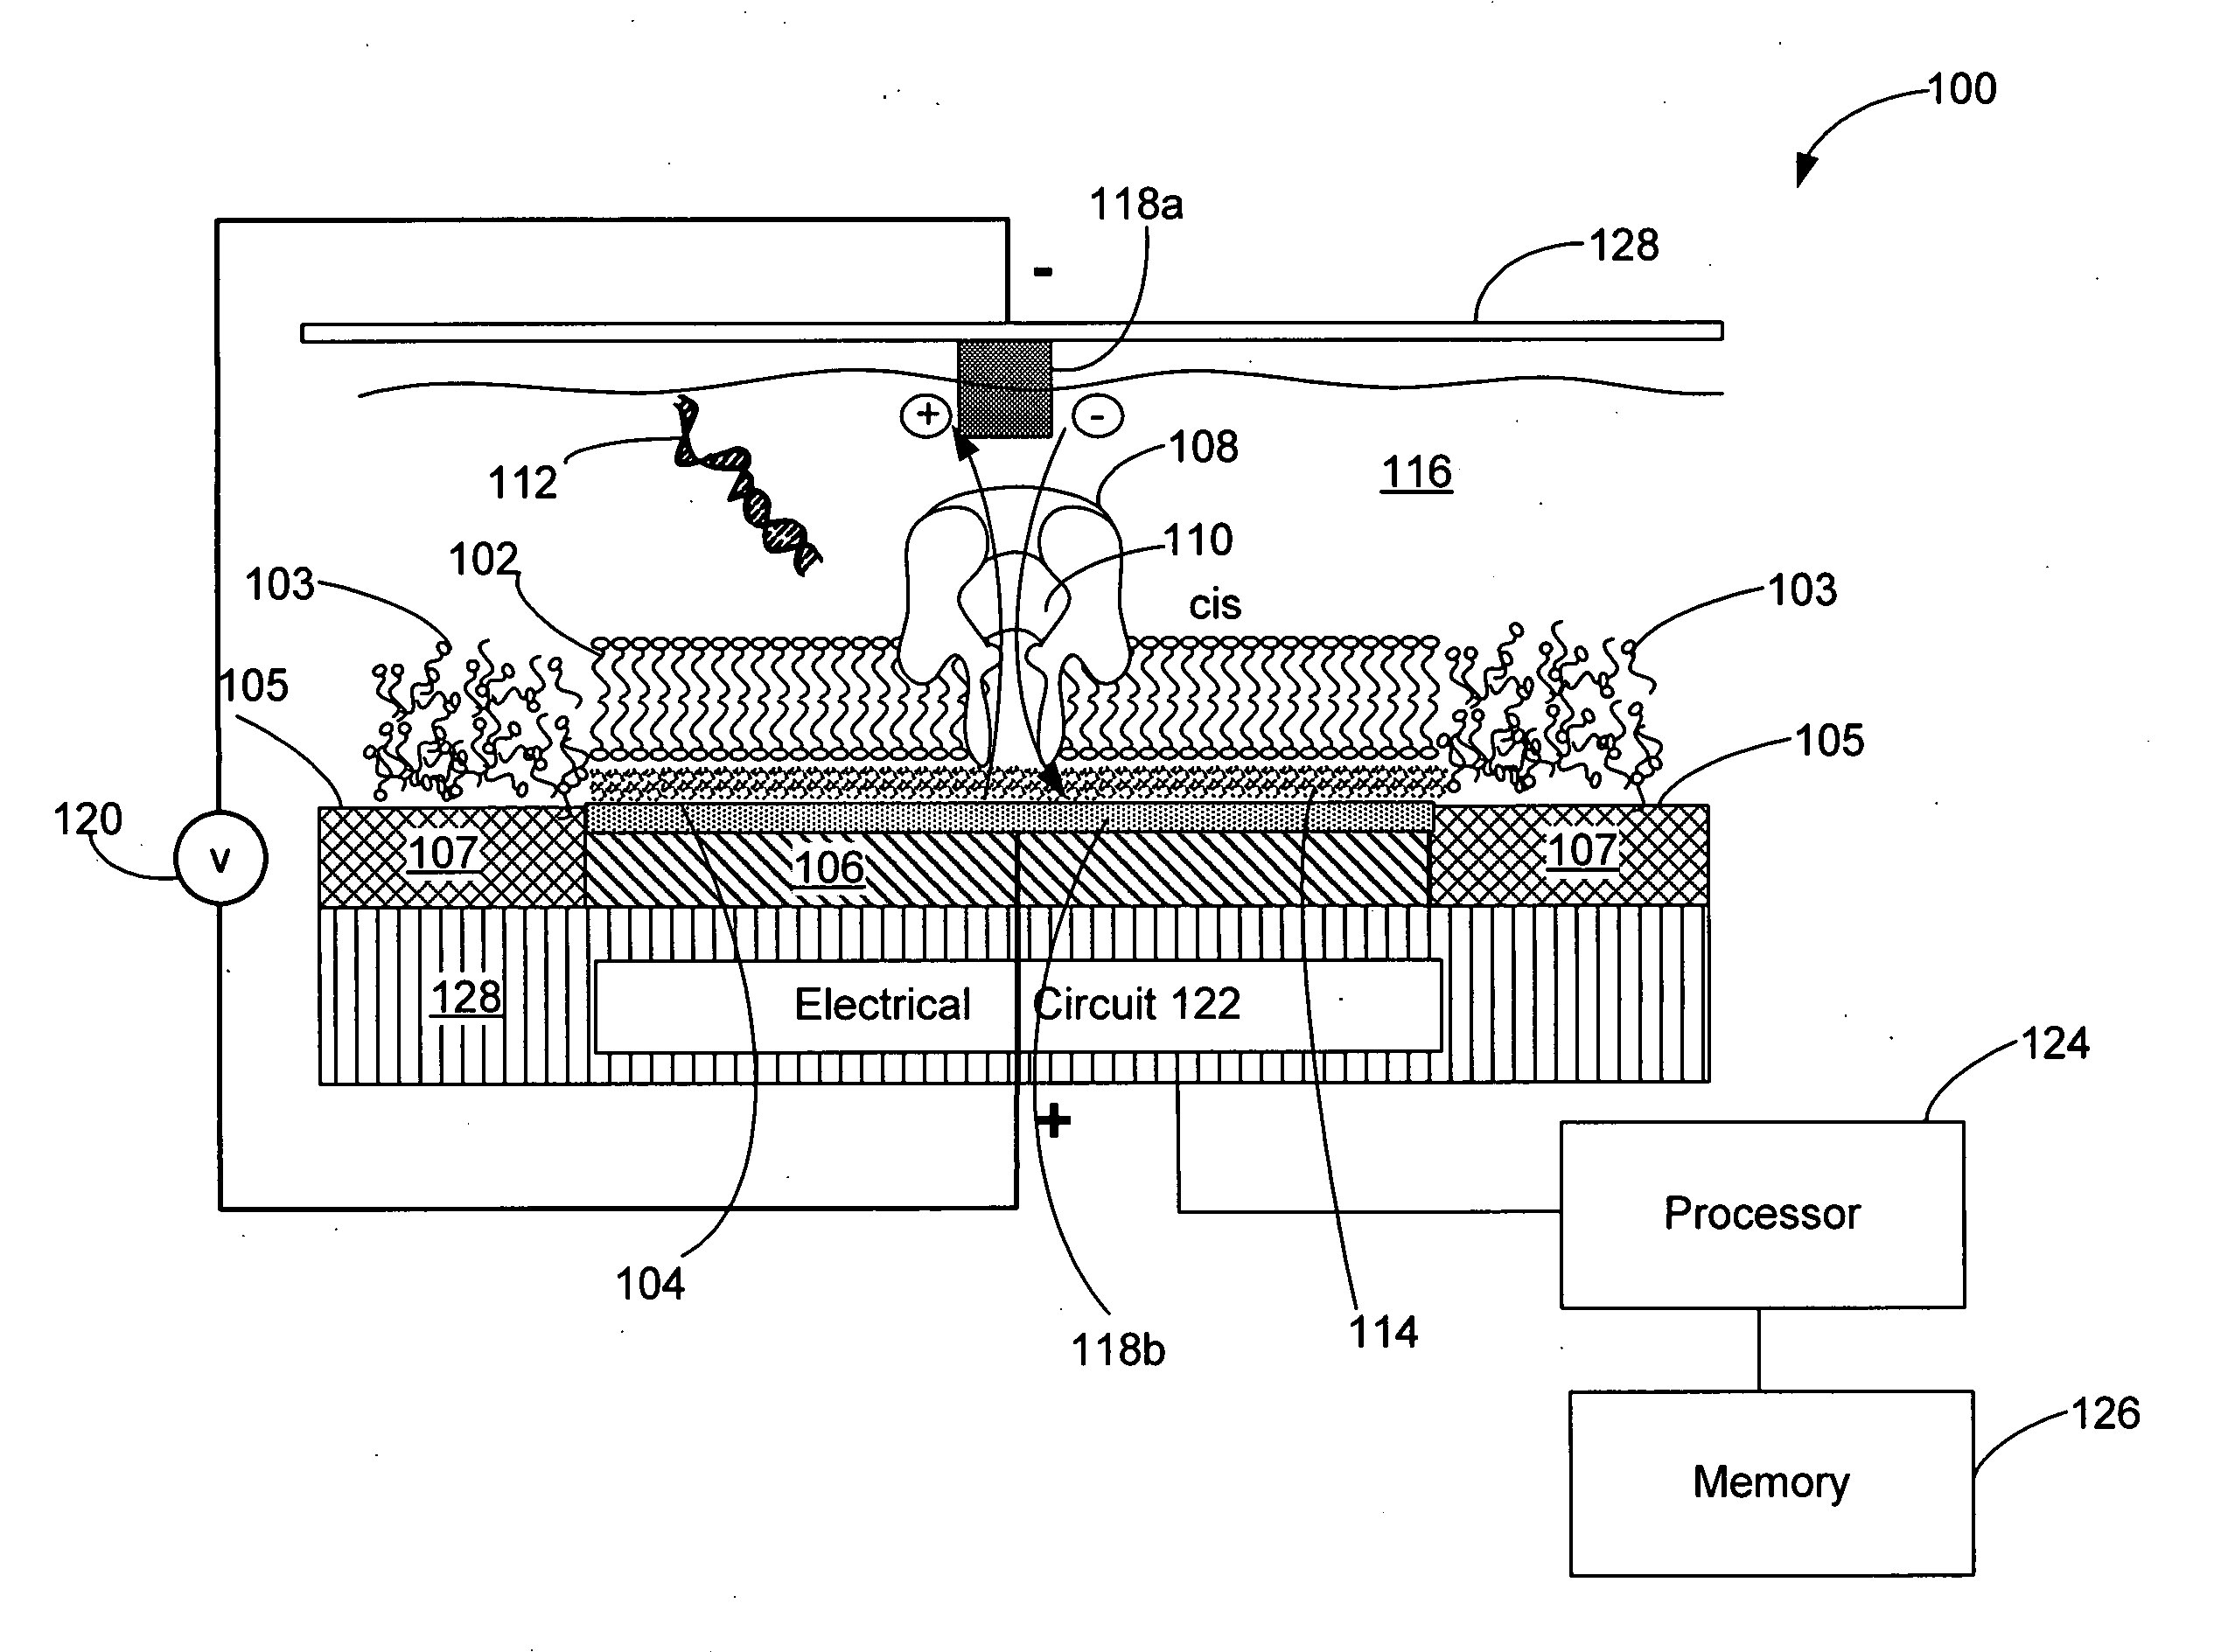 Systems and methods for assembling a lipid bilayer on a substantially planar solid surface